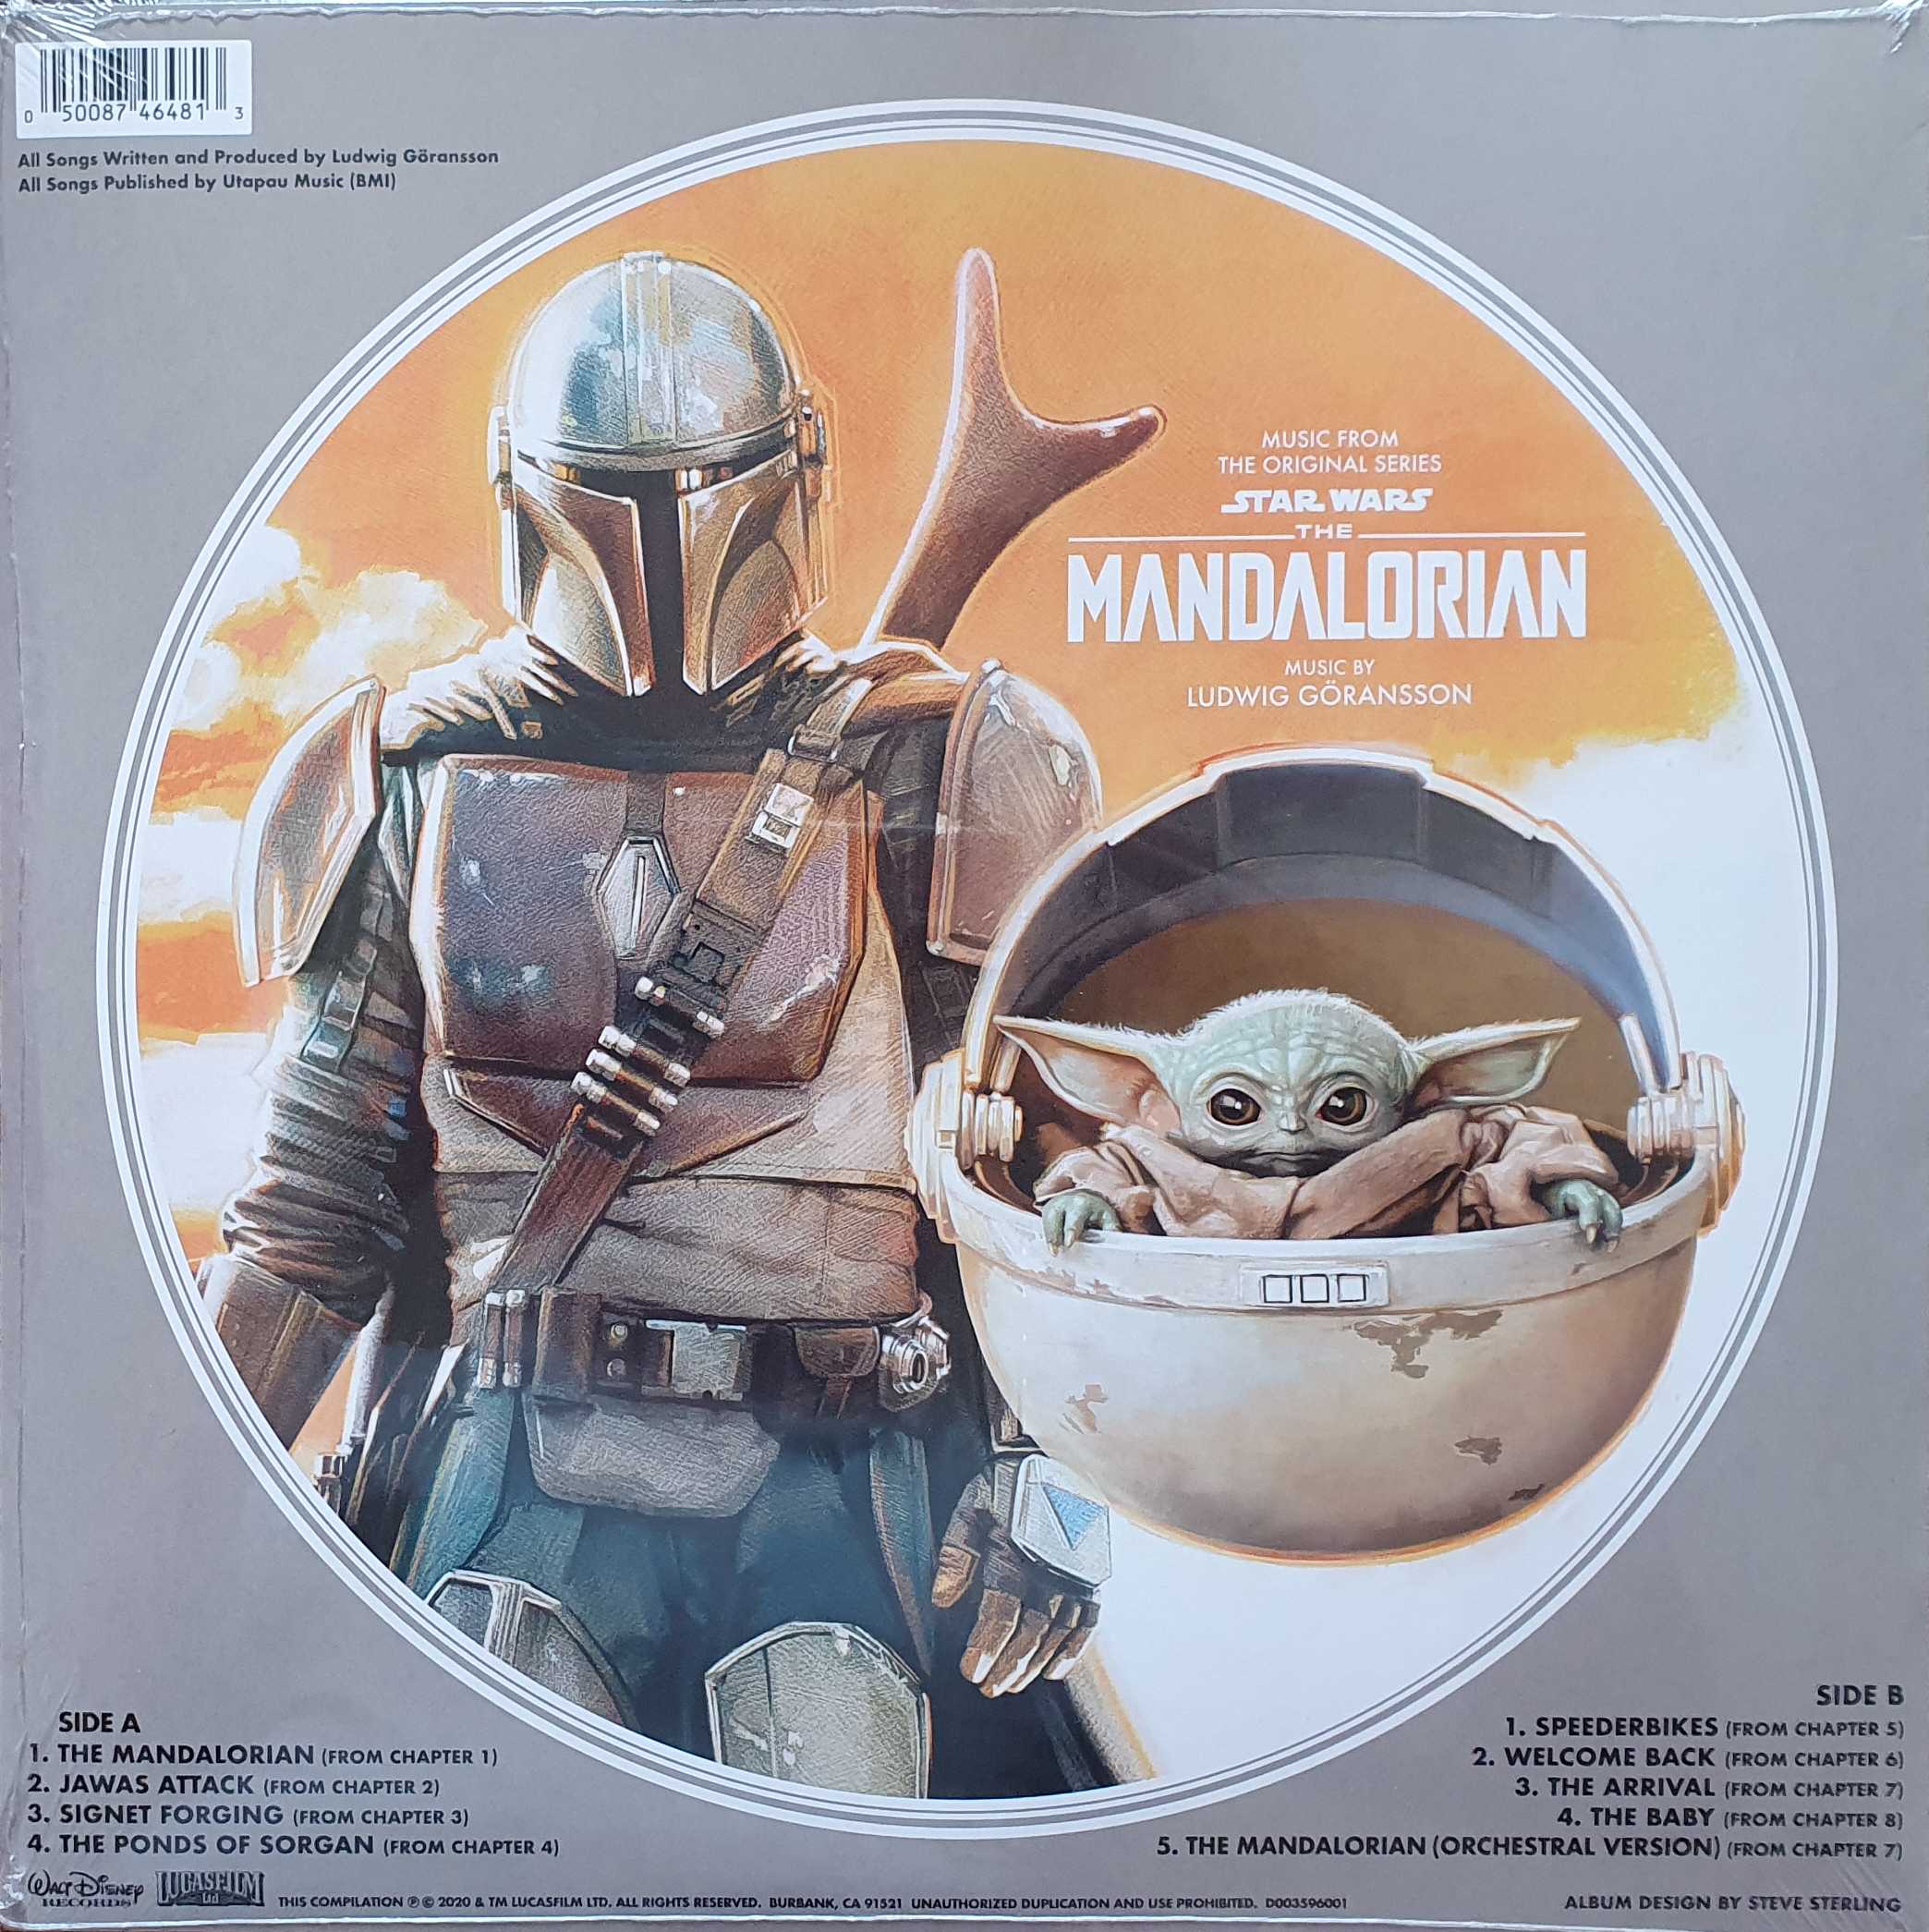 Picture of D003596001 Star Wars: The Mandalorian (Music From The Original Series) by artist Ludwig Goransson from ITV, Channel 4 and Channel 5 library